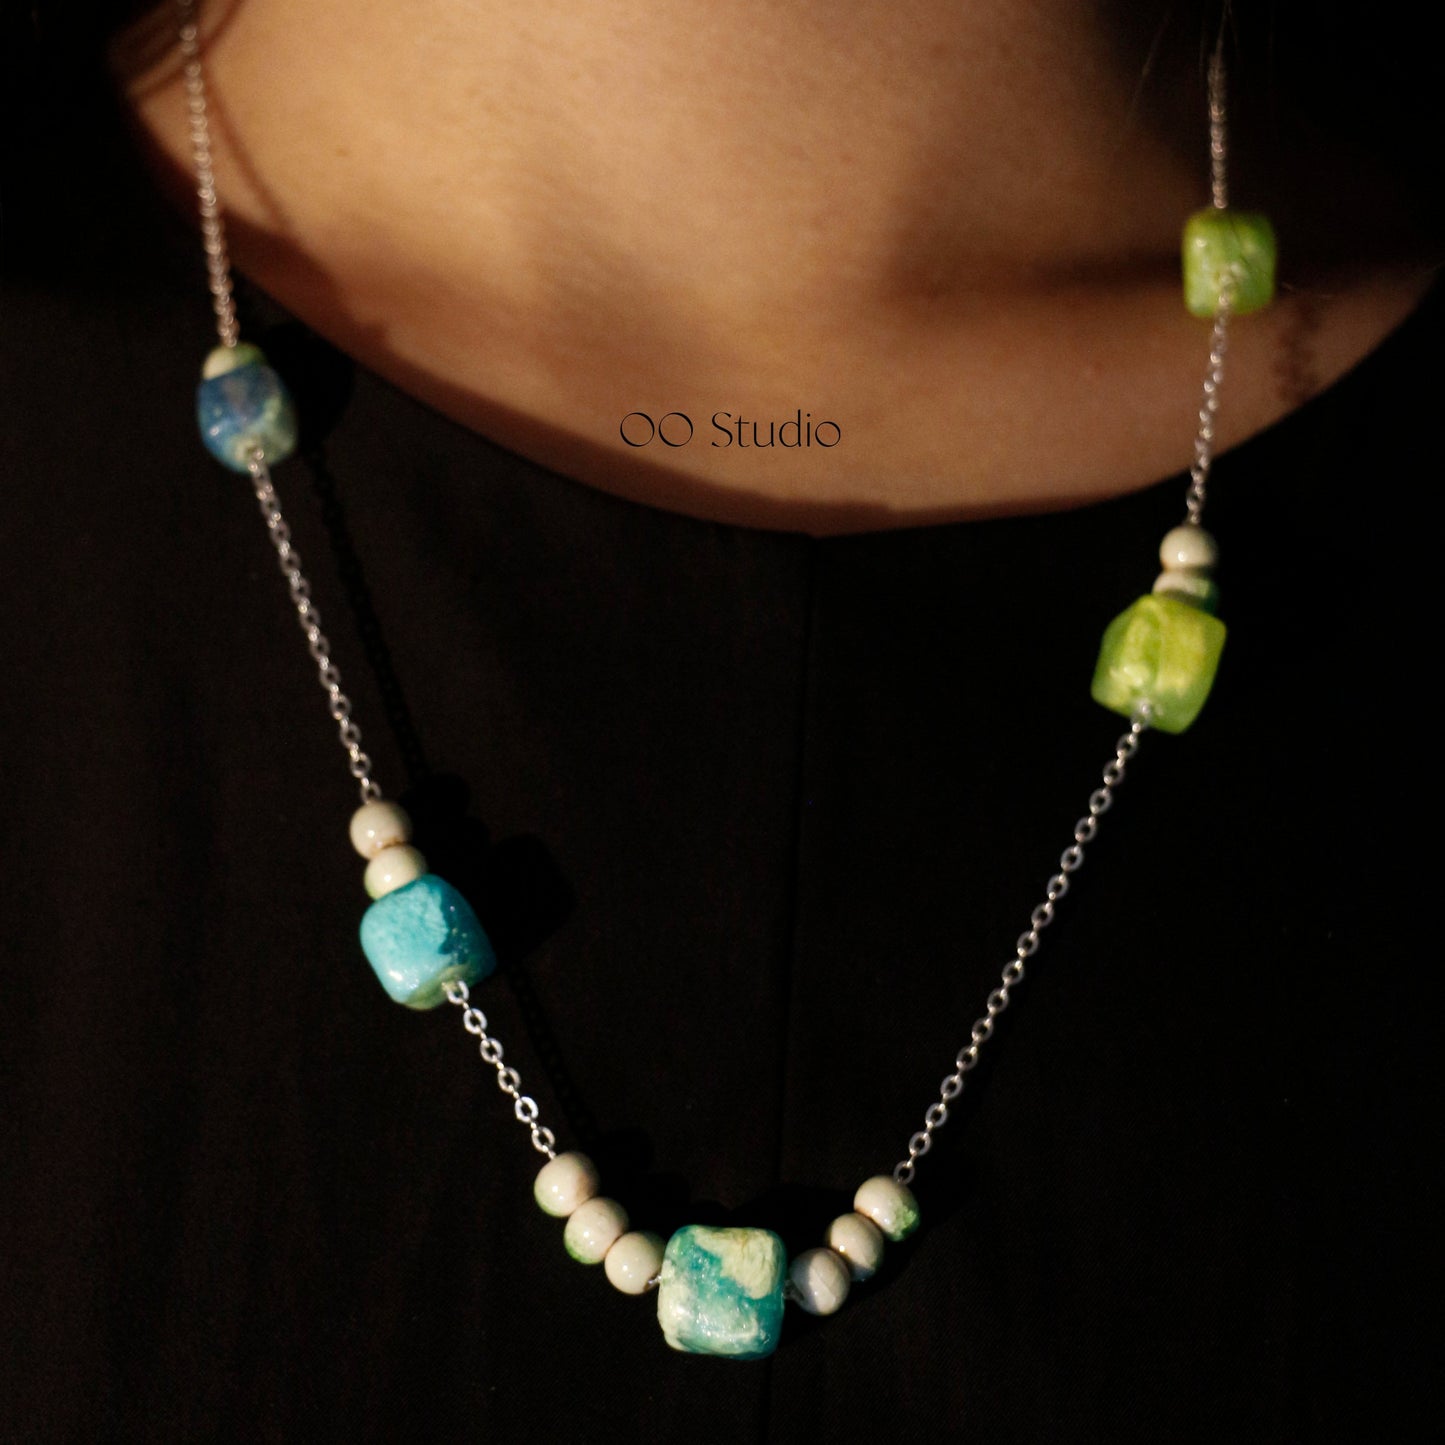 Candy Handmade Bead Necklace